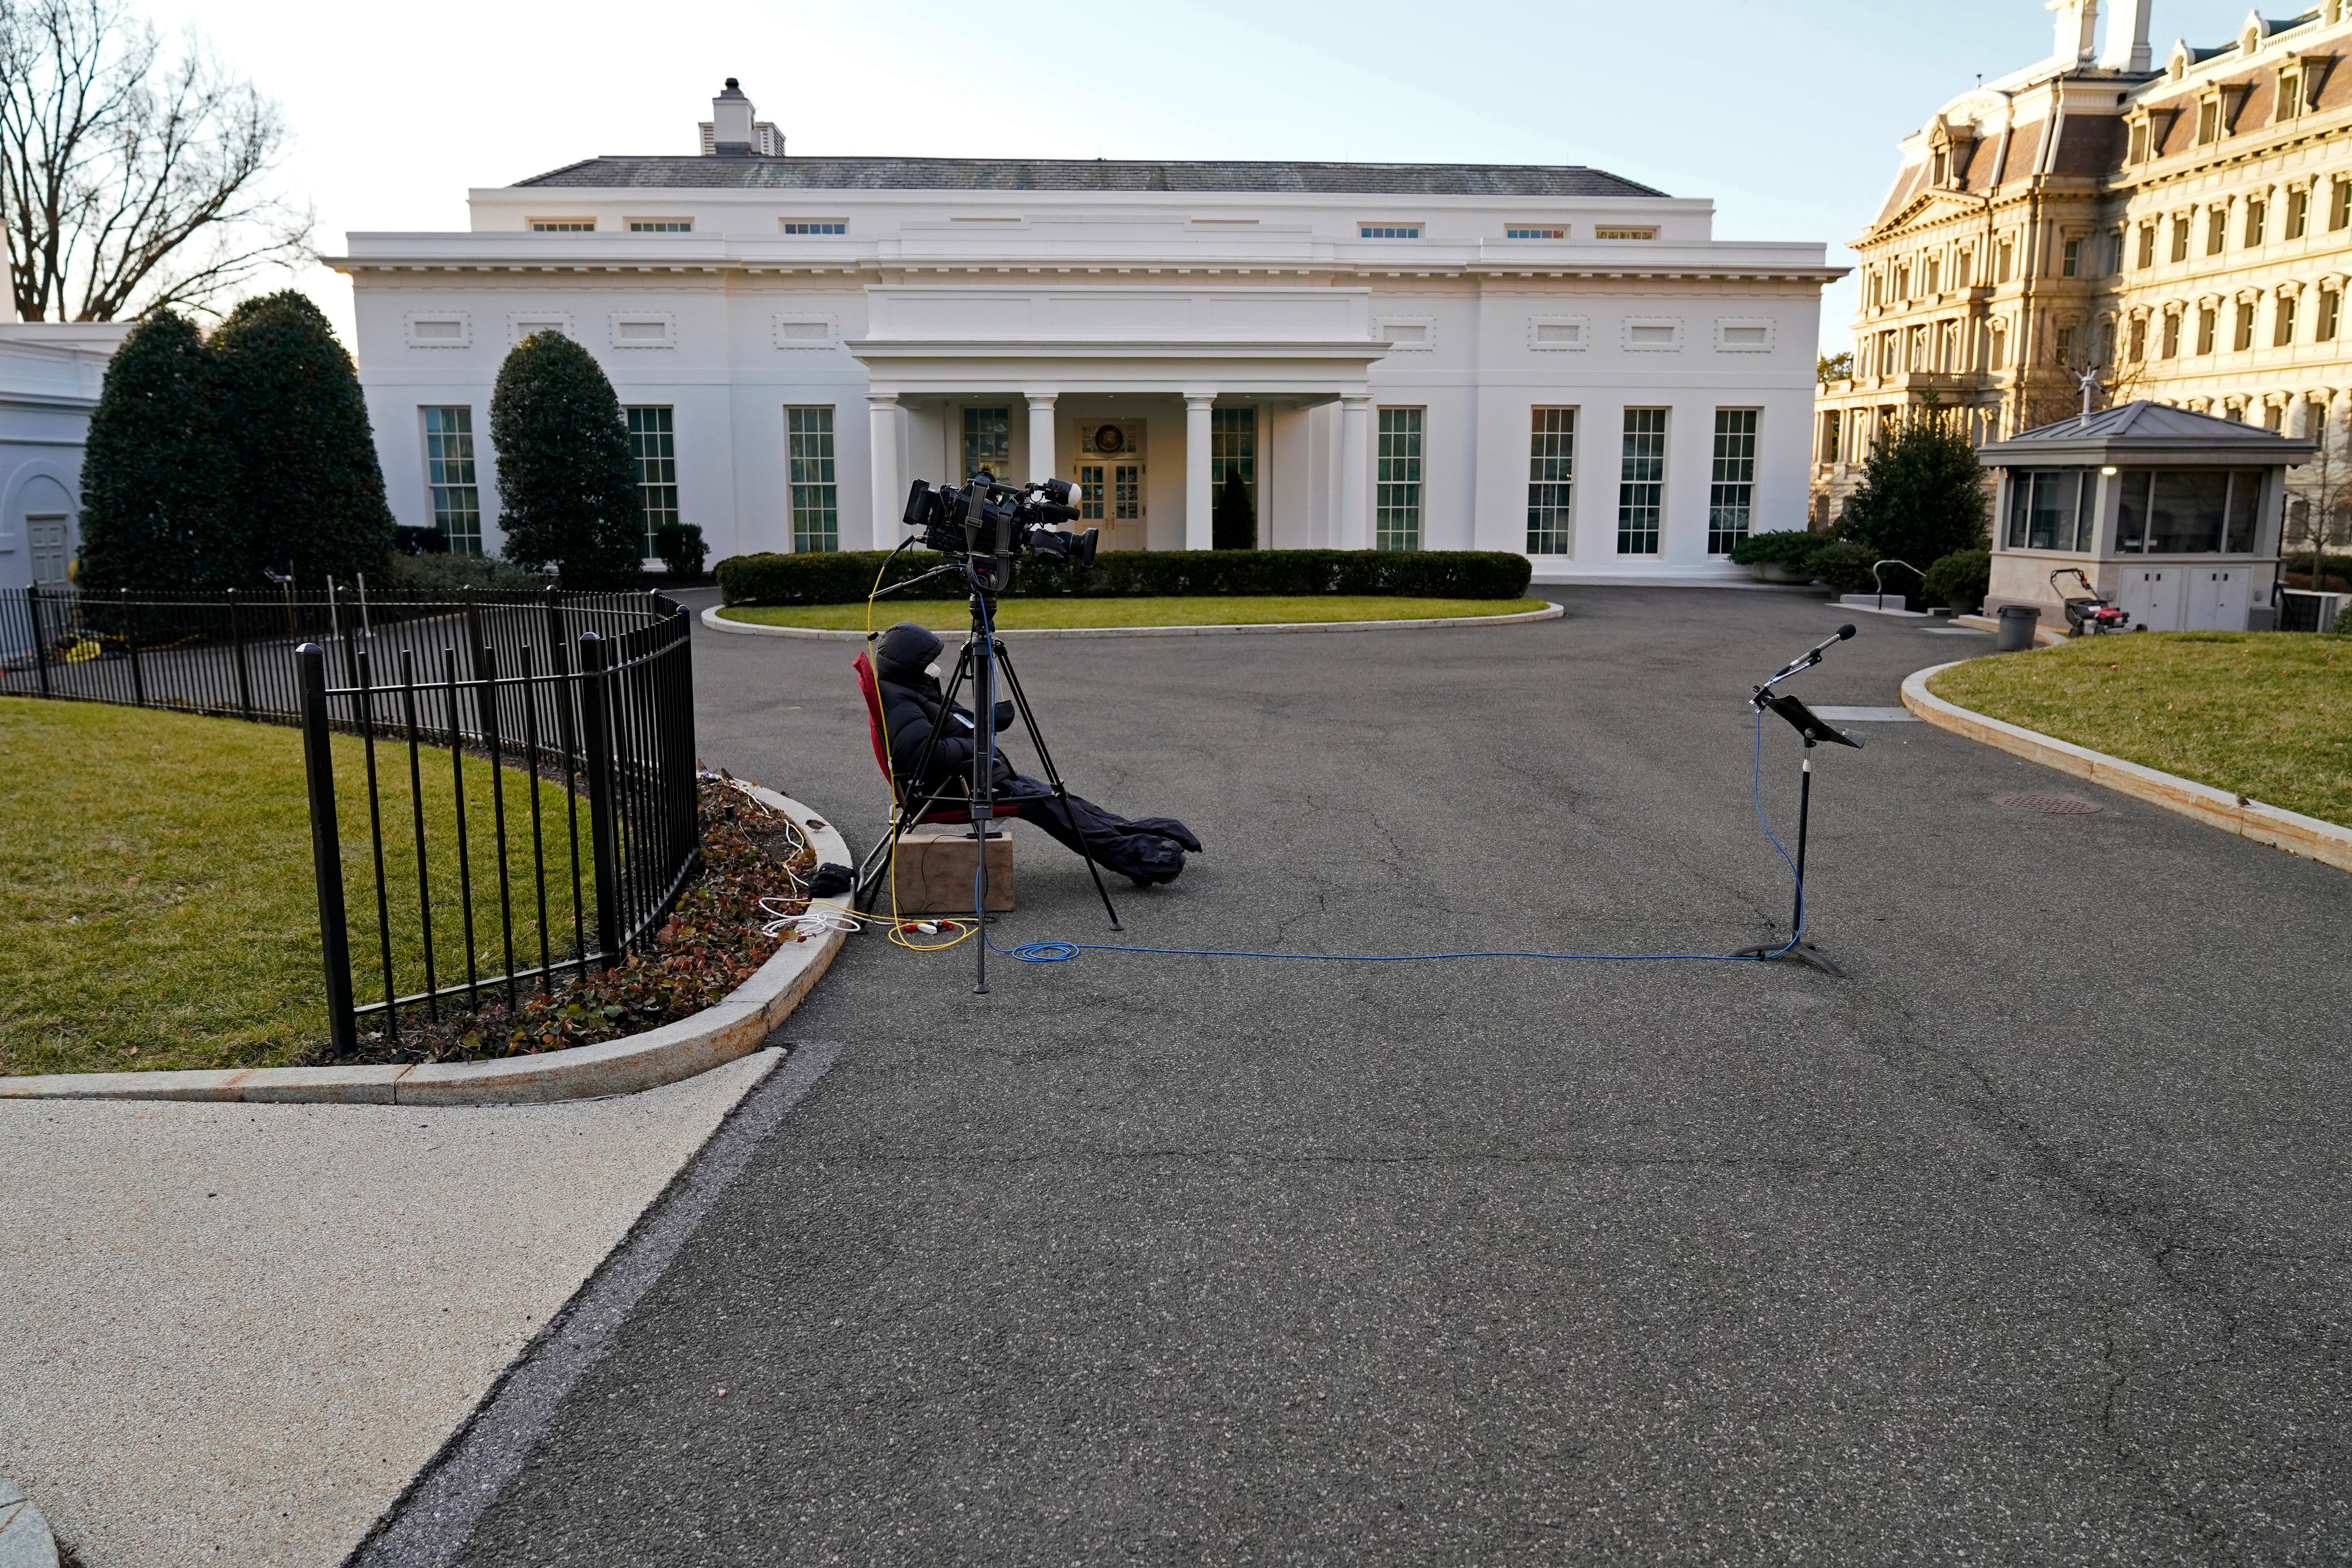 West wing of the White House on Trump’s last full day in office